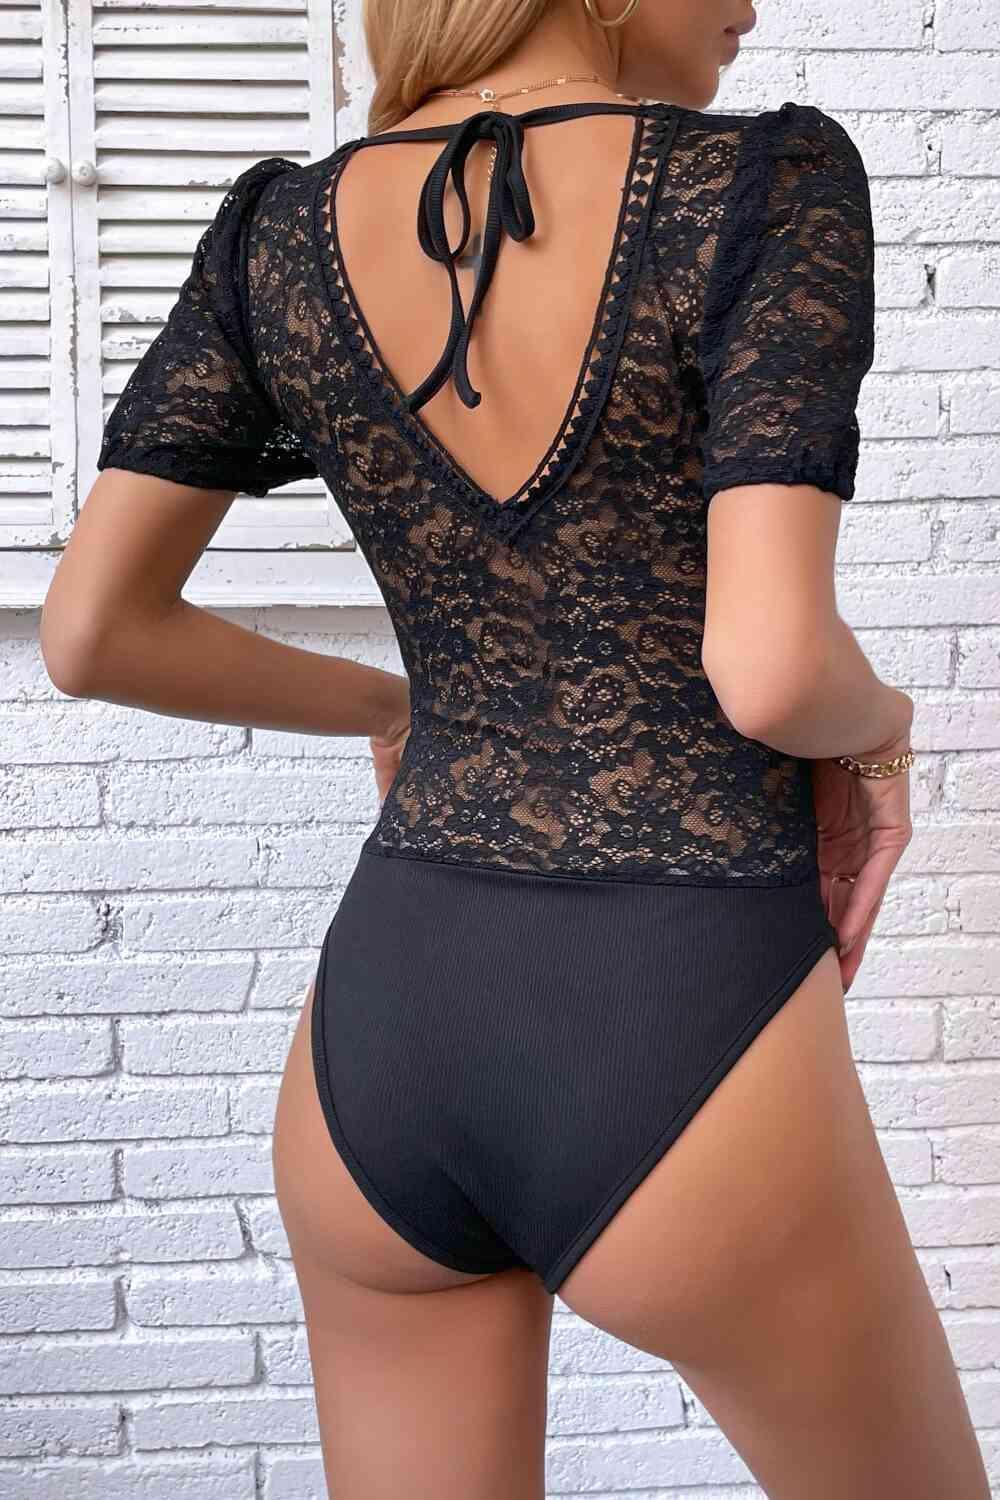 the back of a woman wearing a black bodysuit